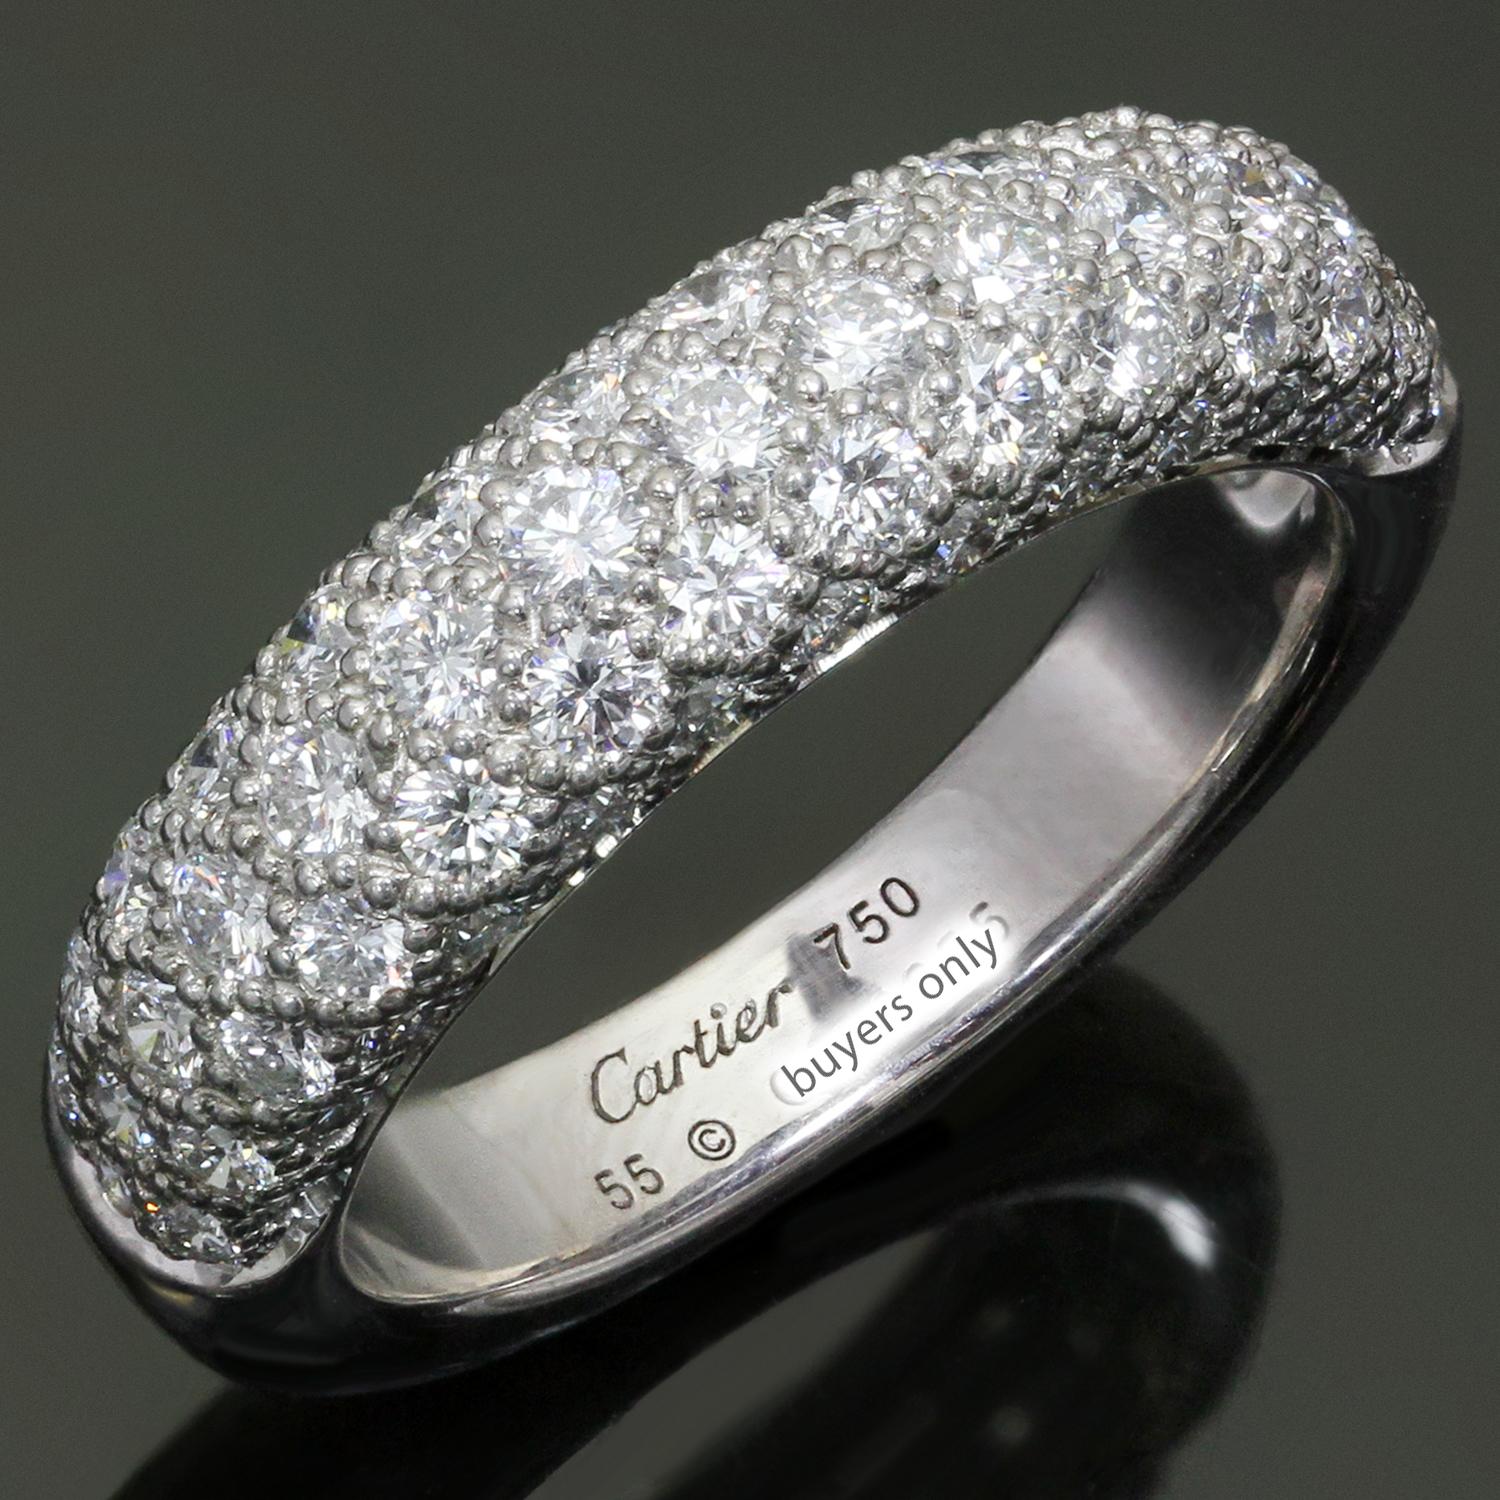 This classic and timeless Cartier ring is crafted in 18k white gold and pave  set with round brilliant D-F VVS1-VVS2 diamonds weighing an estimated 1.7 carats Made in France circa 1980s. Measurements: 0.23